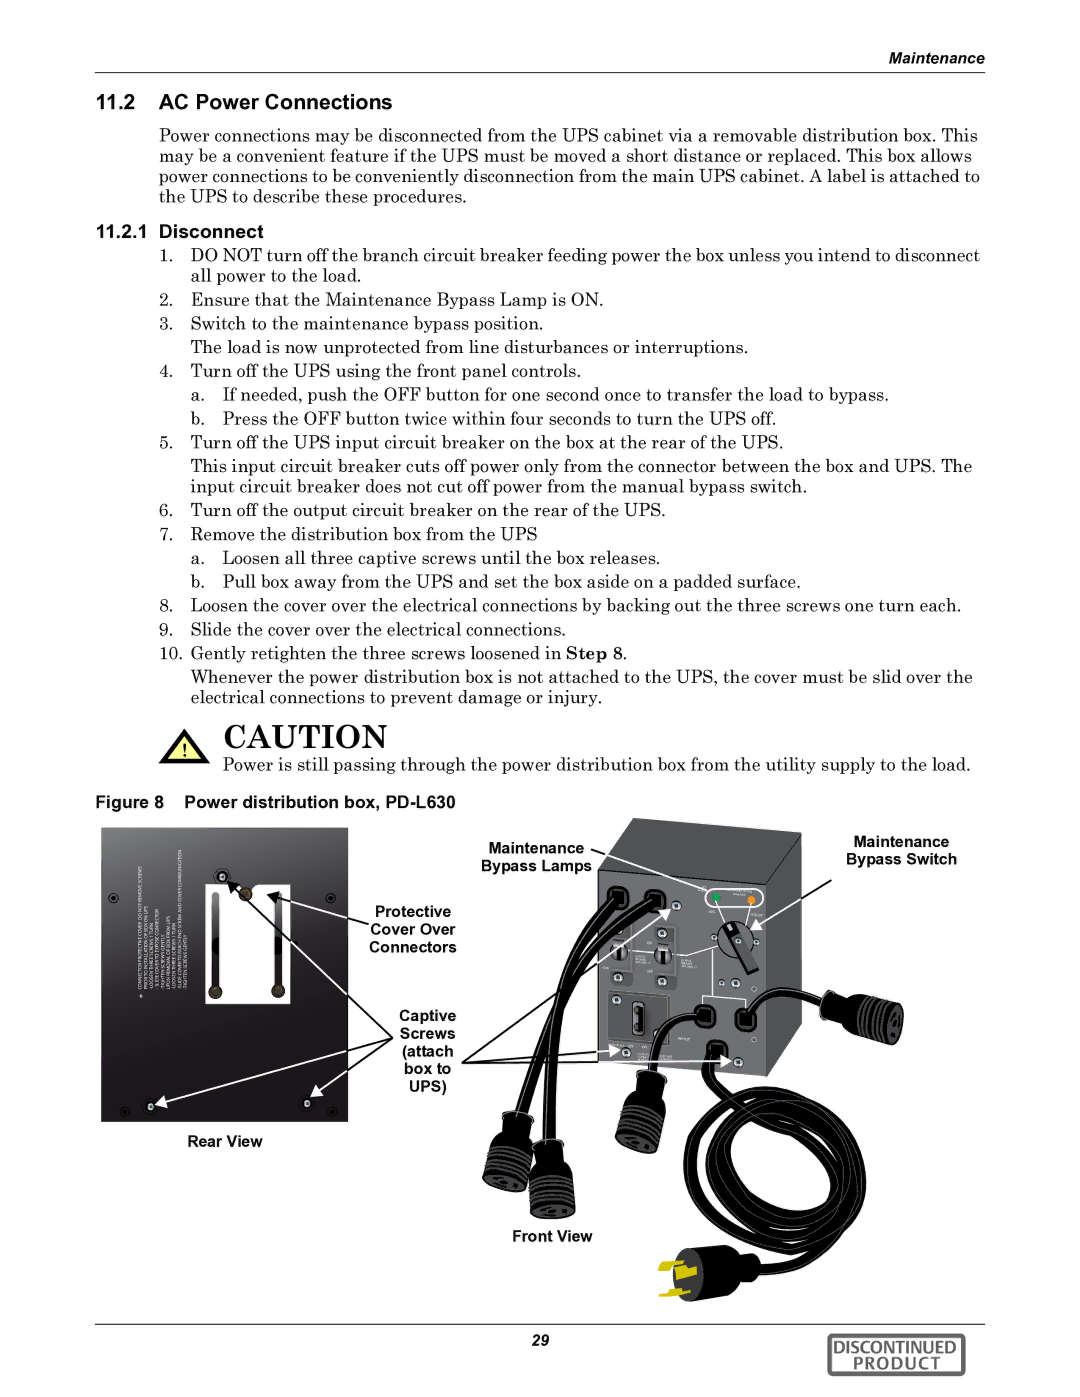 Emerson GXT2-6000RTL630 user manual AC Power Connections, Disconnect, Captive, Rear View 